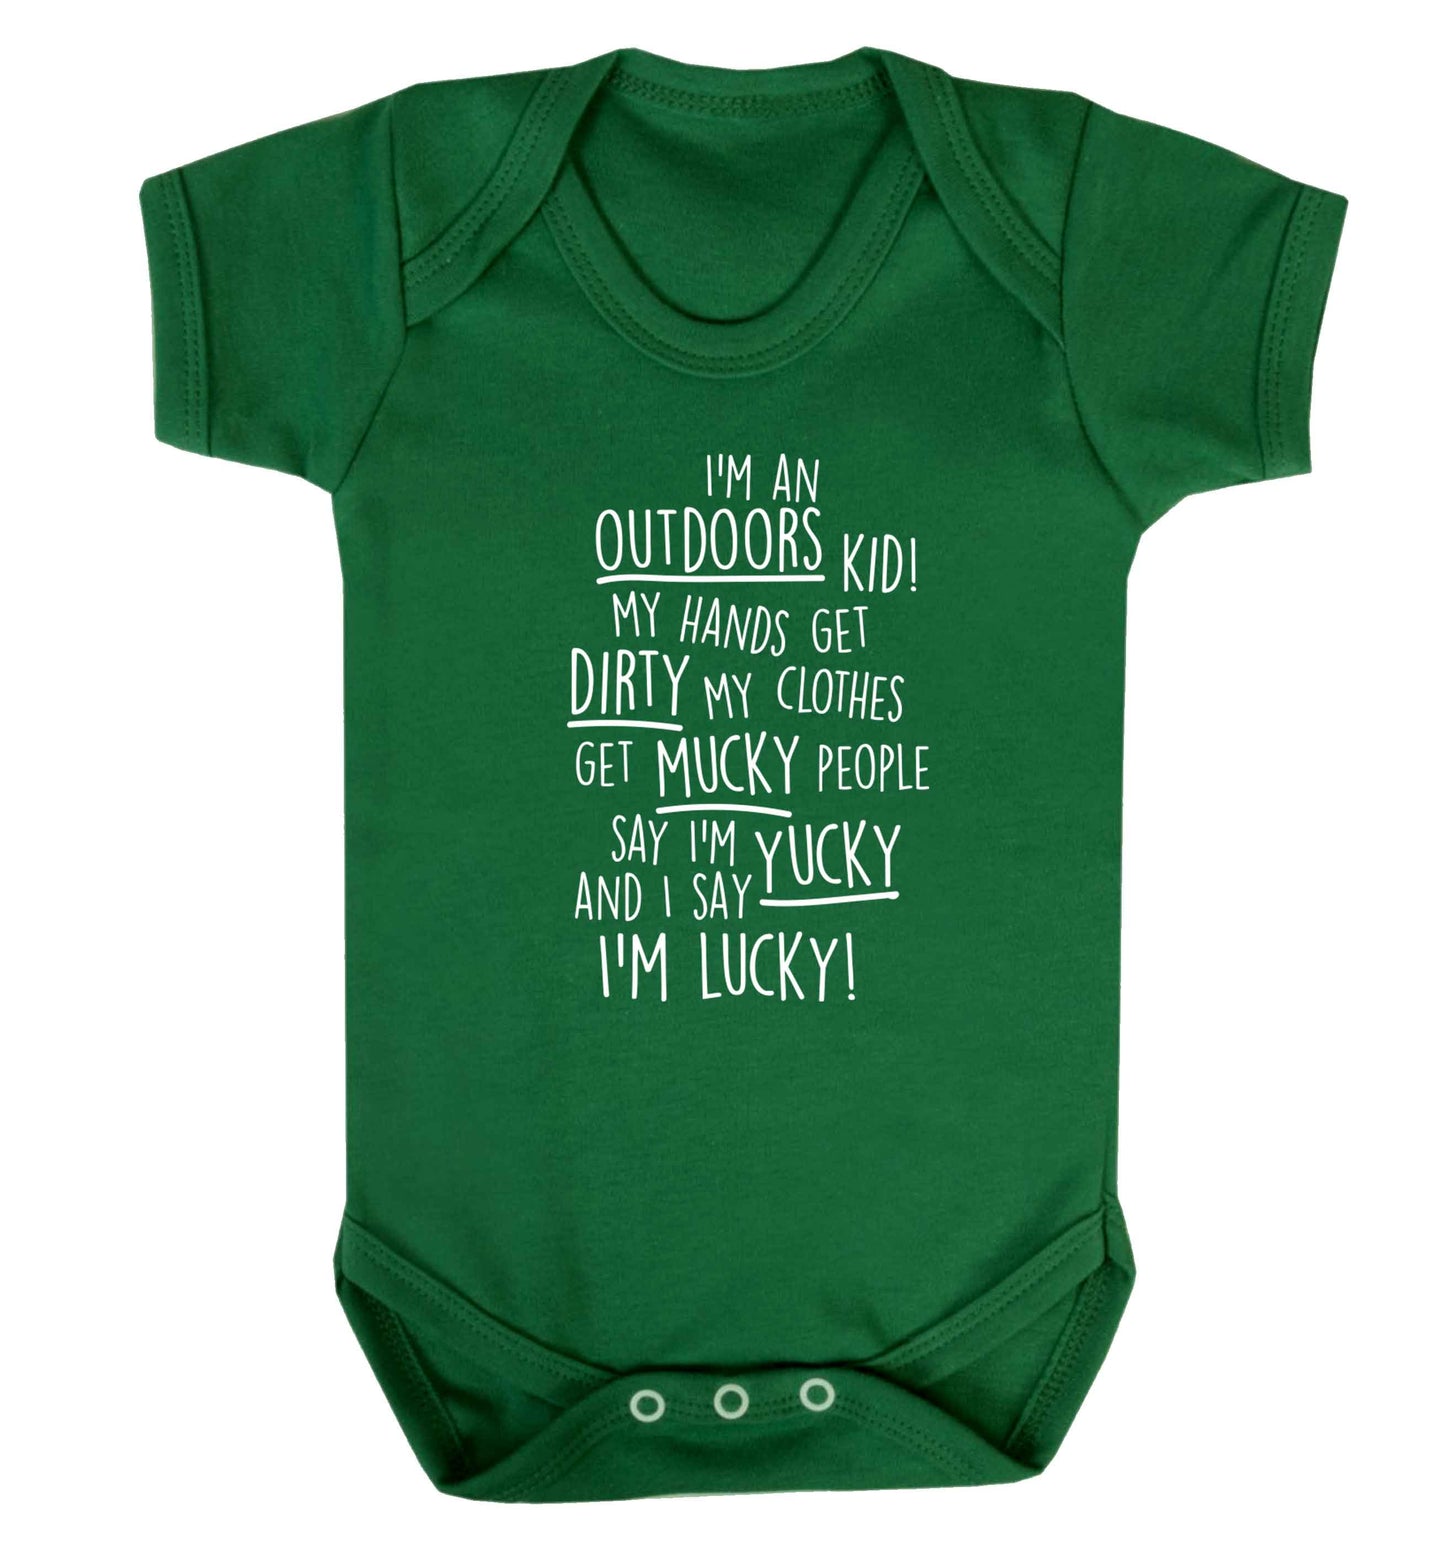 I'm an outdoors kid poem Baby Vest green 18-24 months